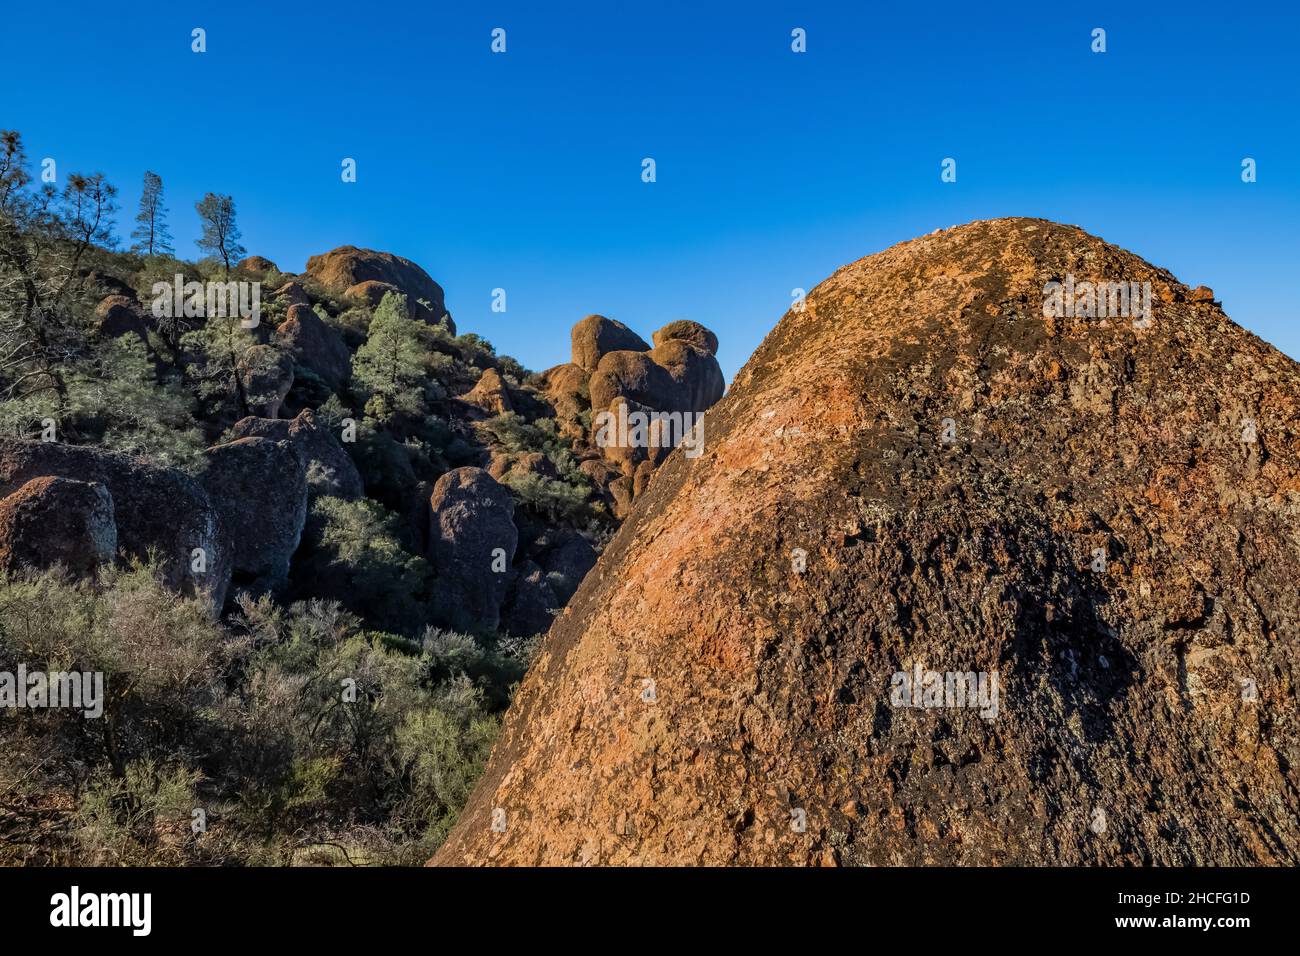 Pinnacles Volcanic Formations, made of eroded volcanic breccia, along High Peaks Trail in Pinnacles National Park, California, USA Stock Photo